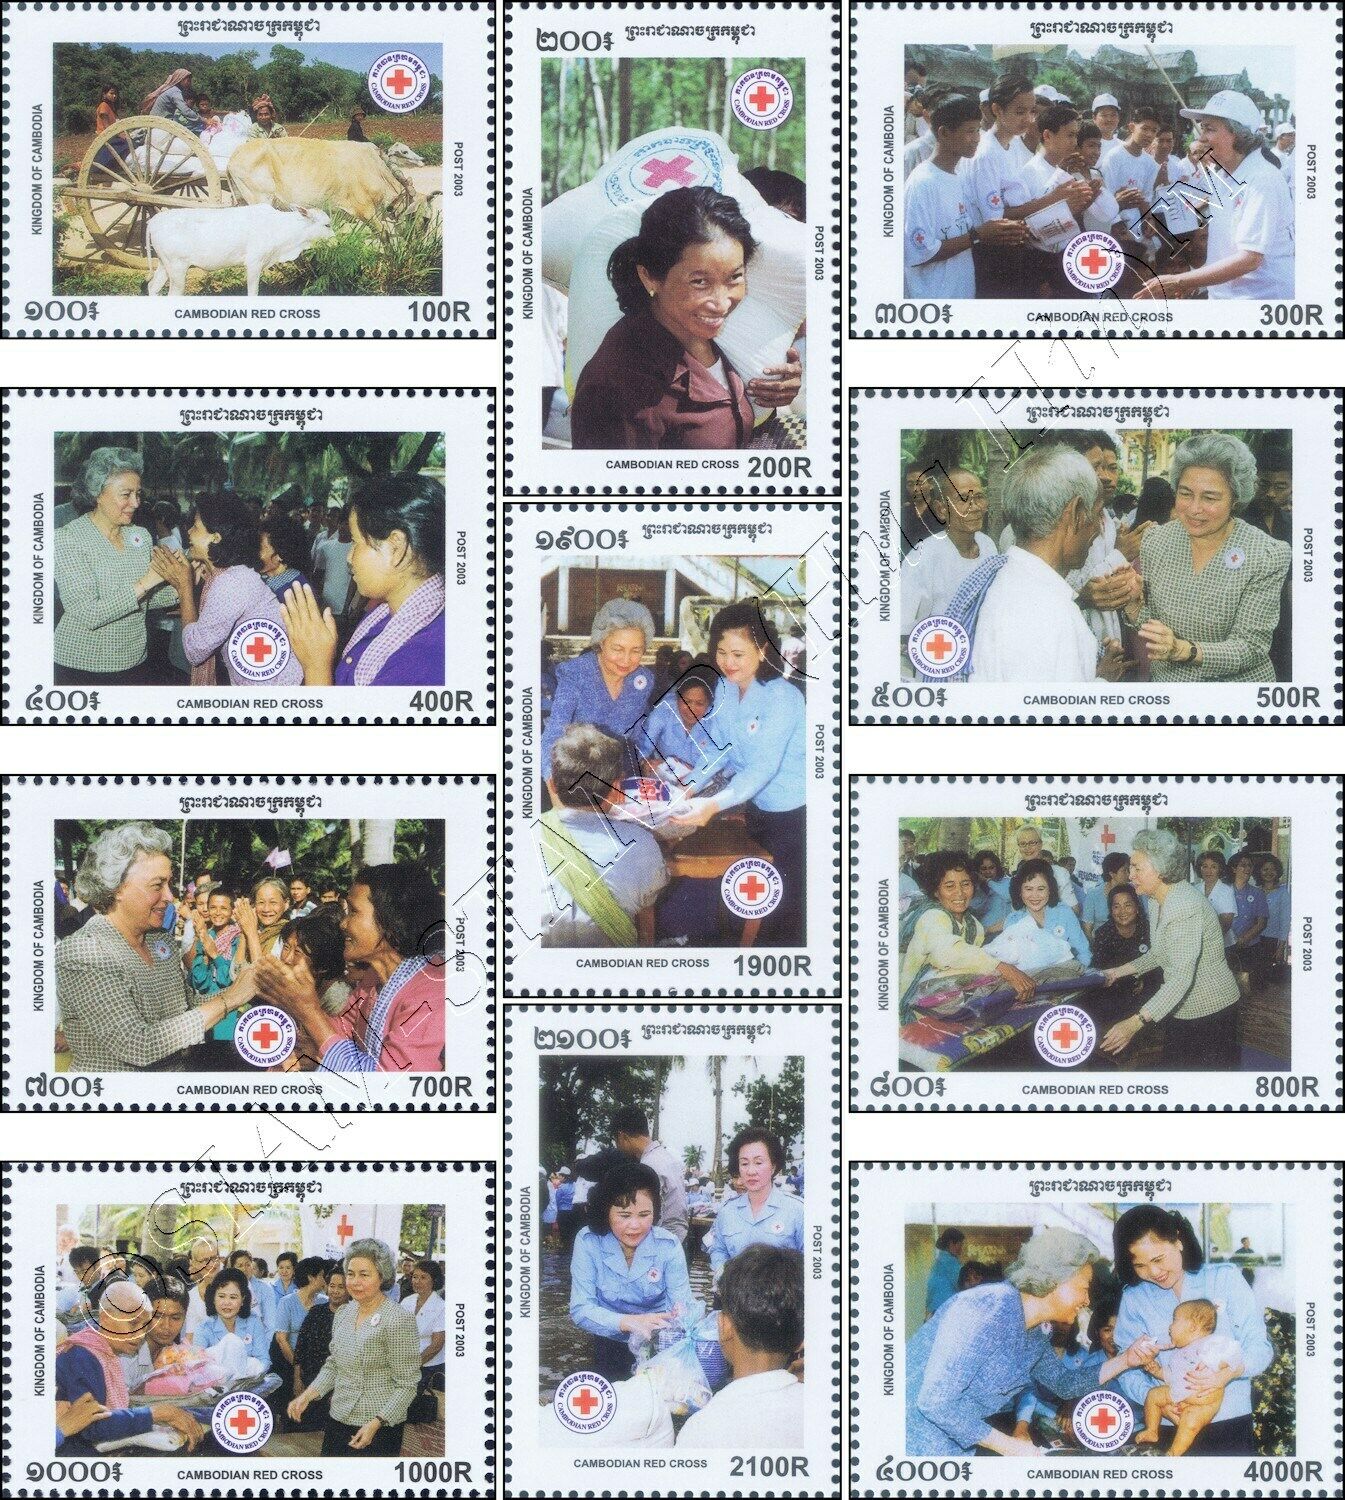 Cambodian Red Cross (mnh)